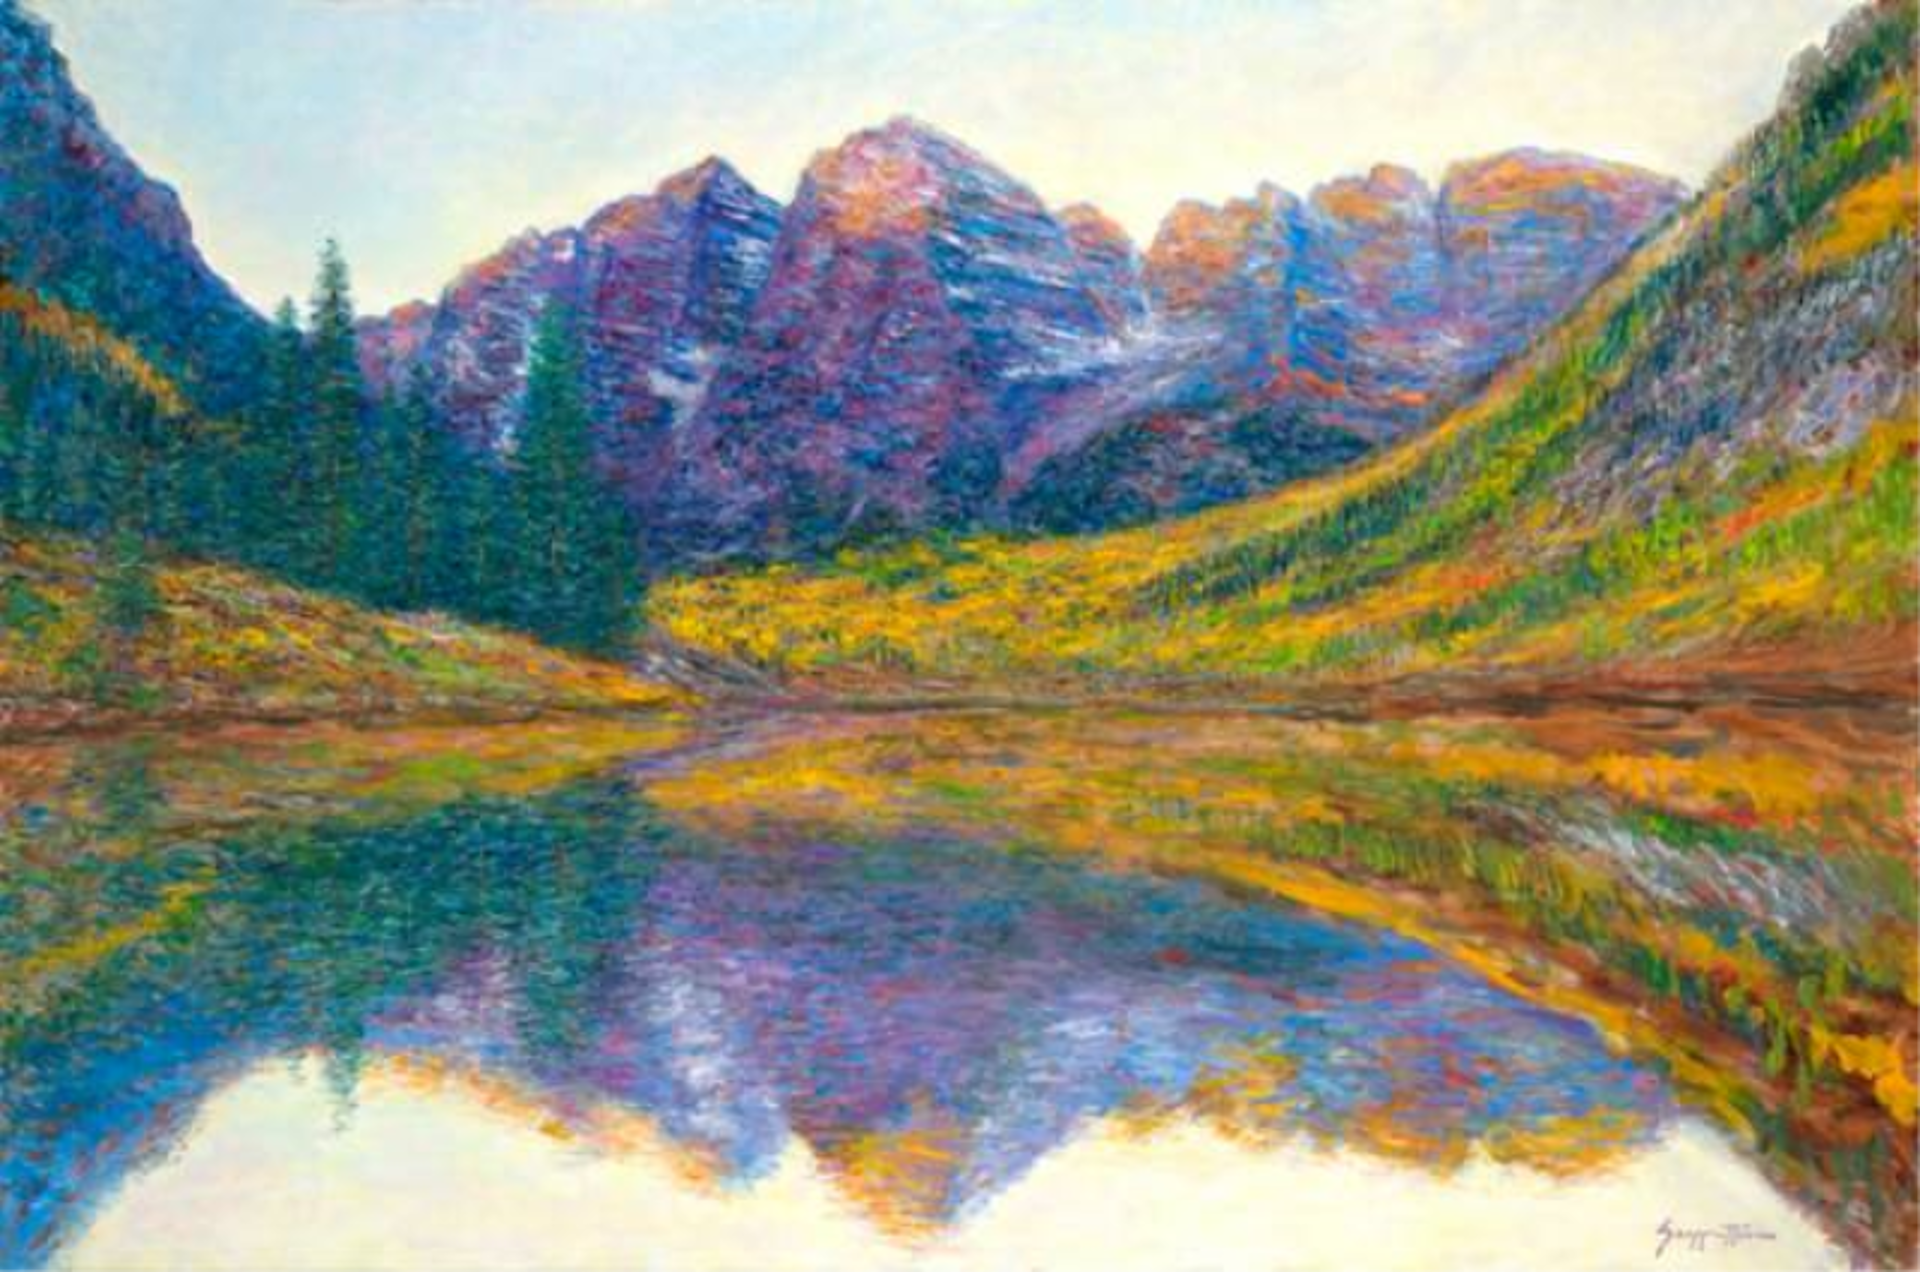 Reflections - The Maroon Bells (AP) by James Scoppettone